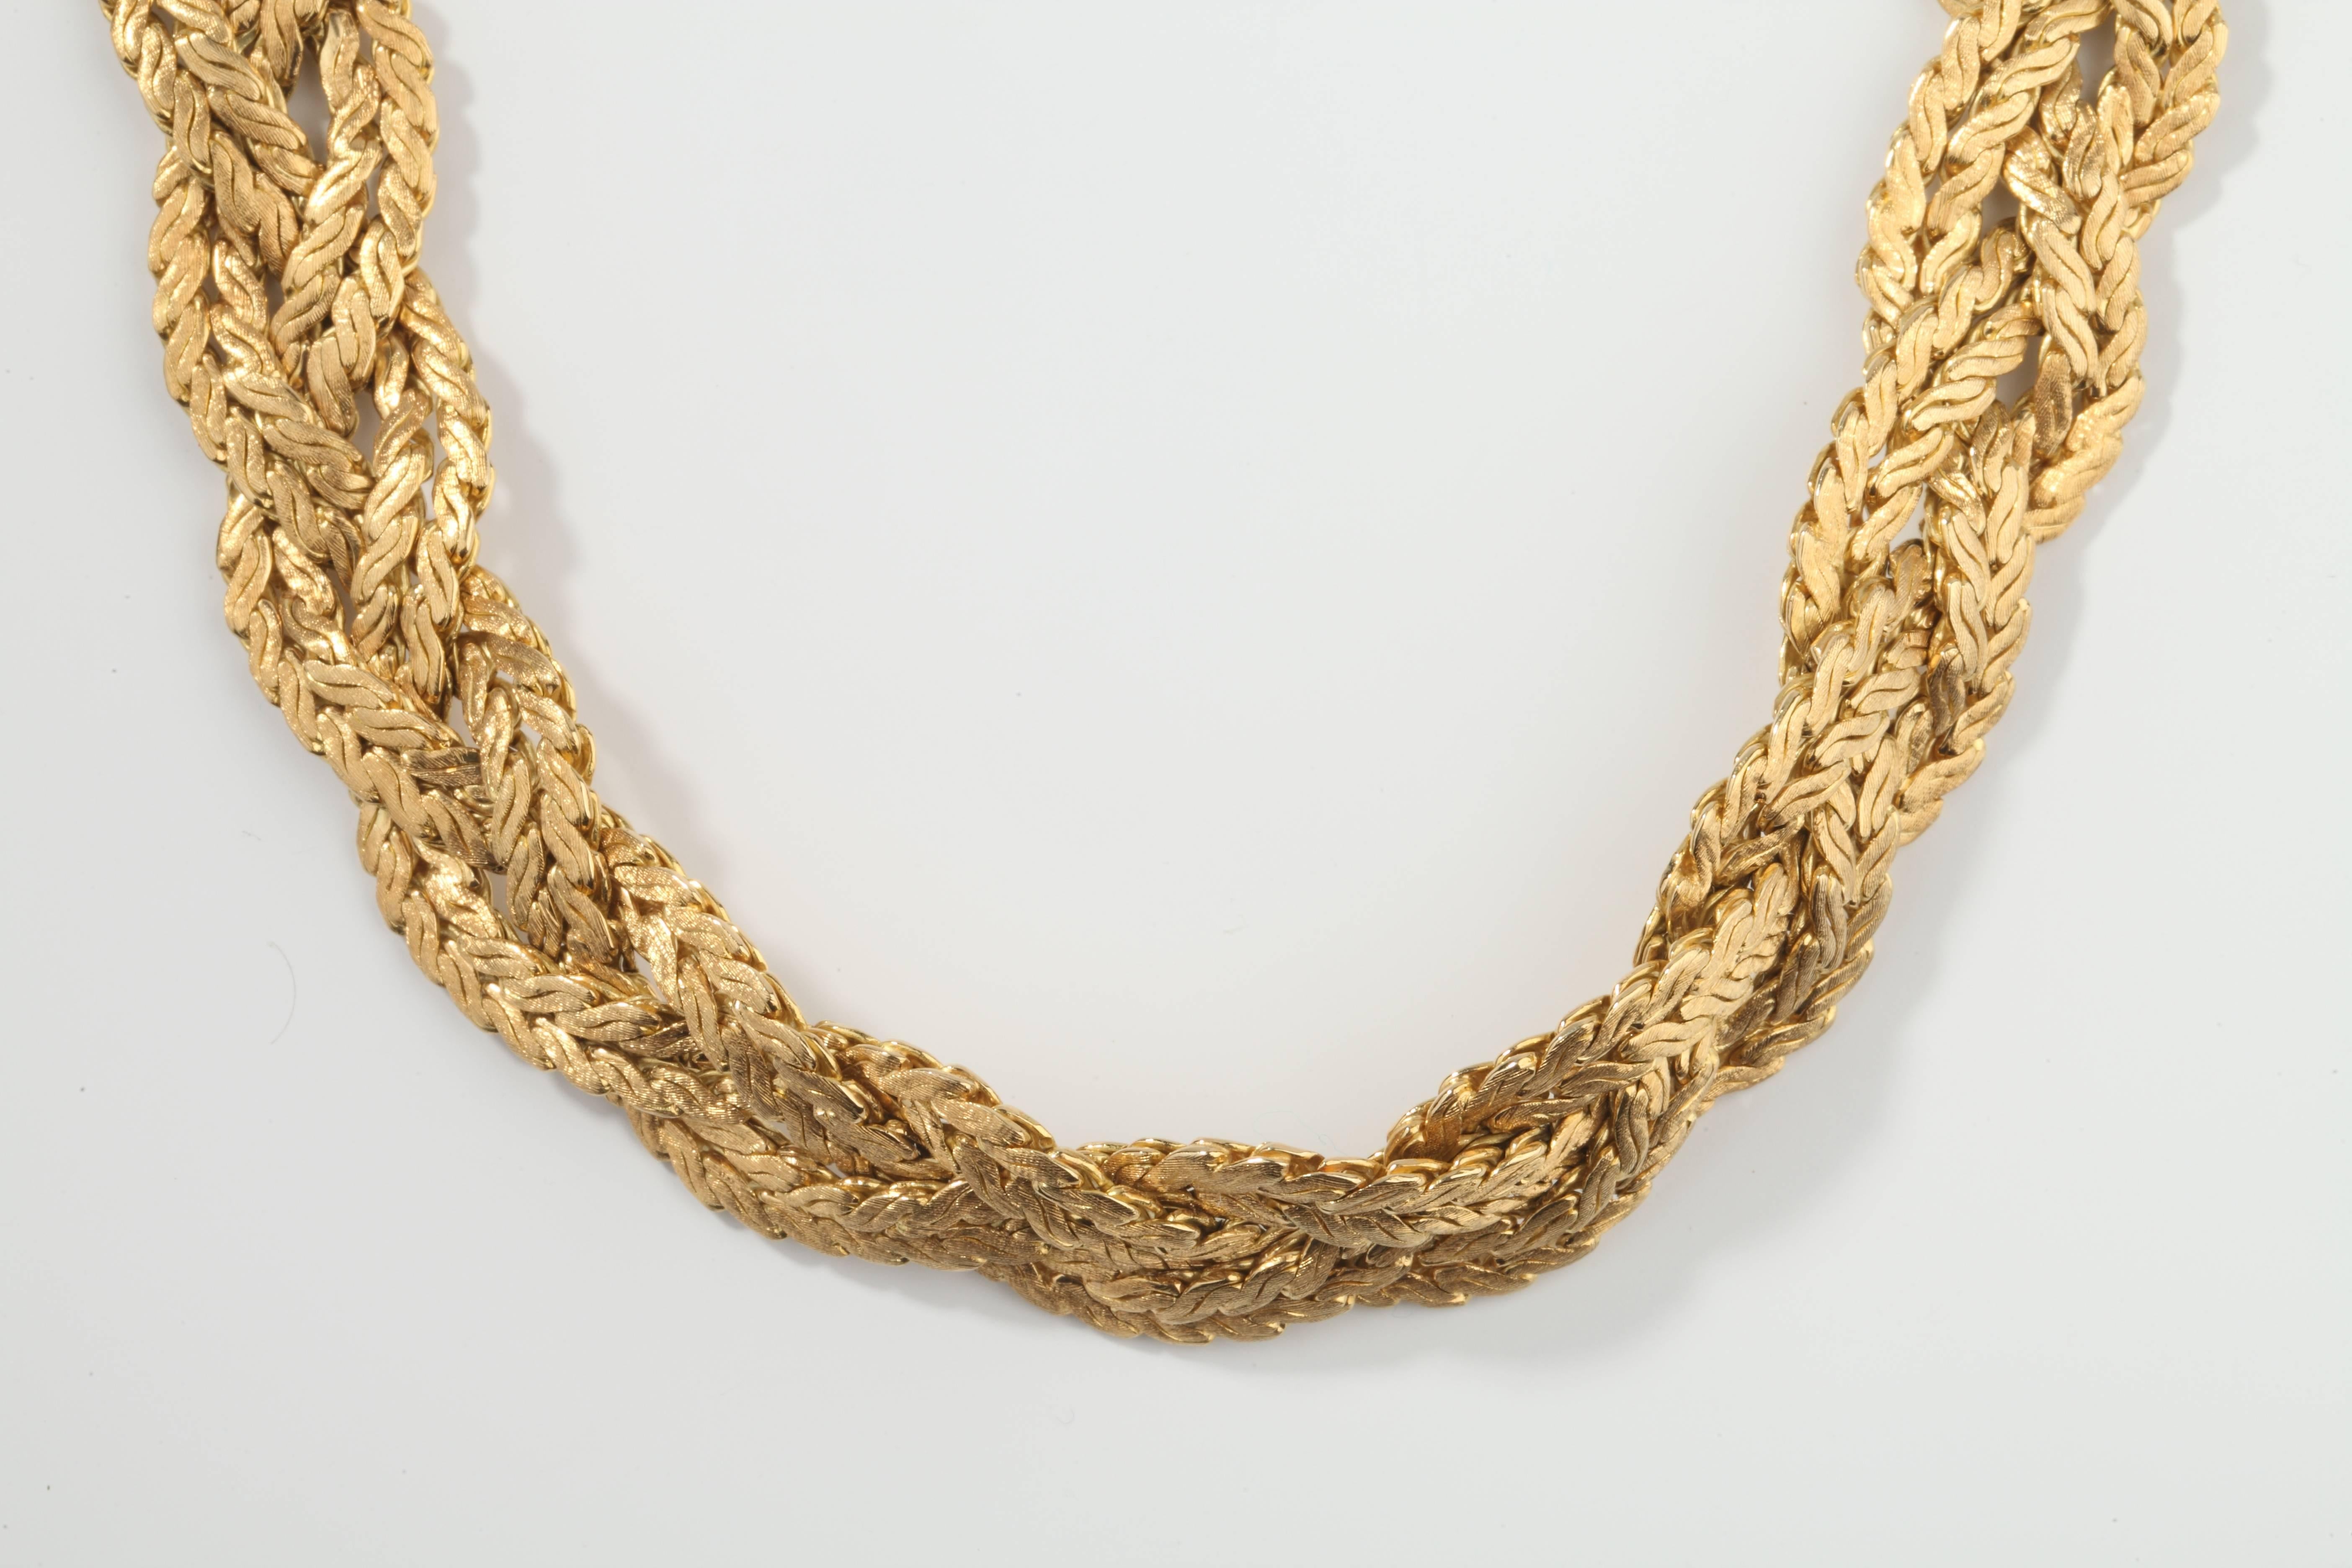 Yellow gold (18K) braided choker necklace.
Signed V.C.A and n° B2517
With it's original blue suede box. 